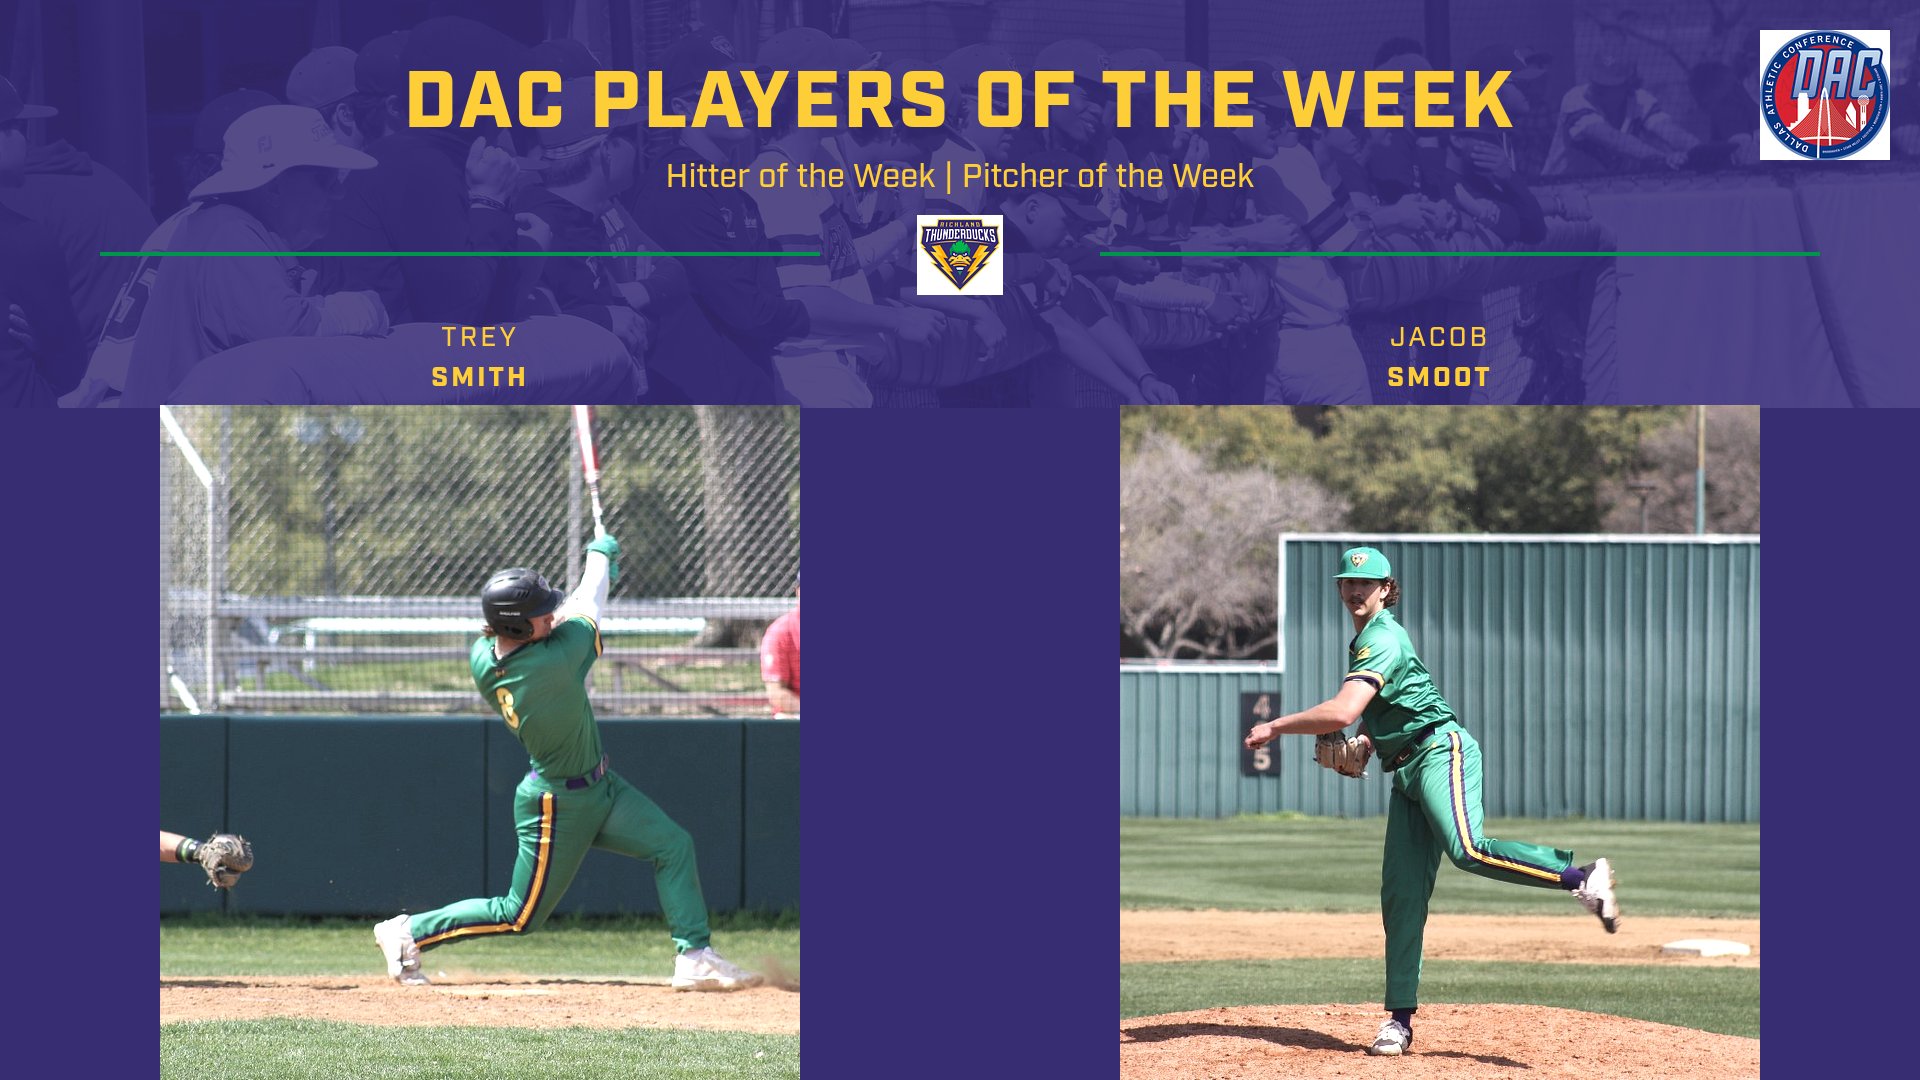 Smith, Smoot Double up as DAC Players of Week